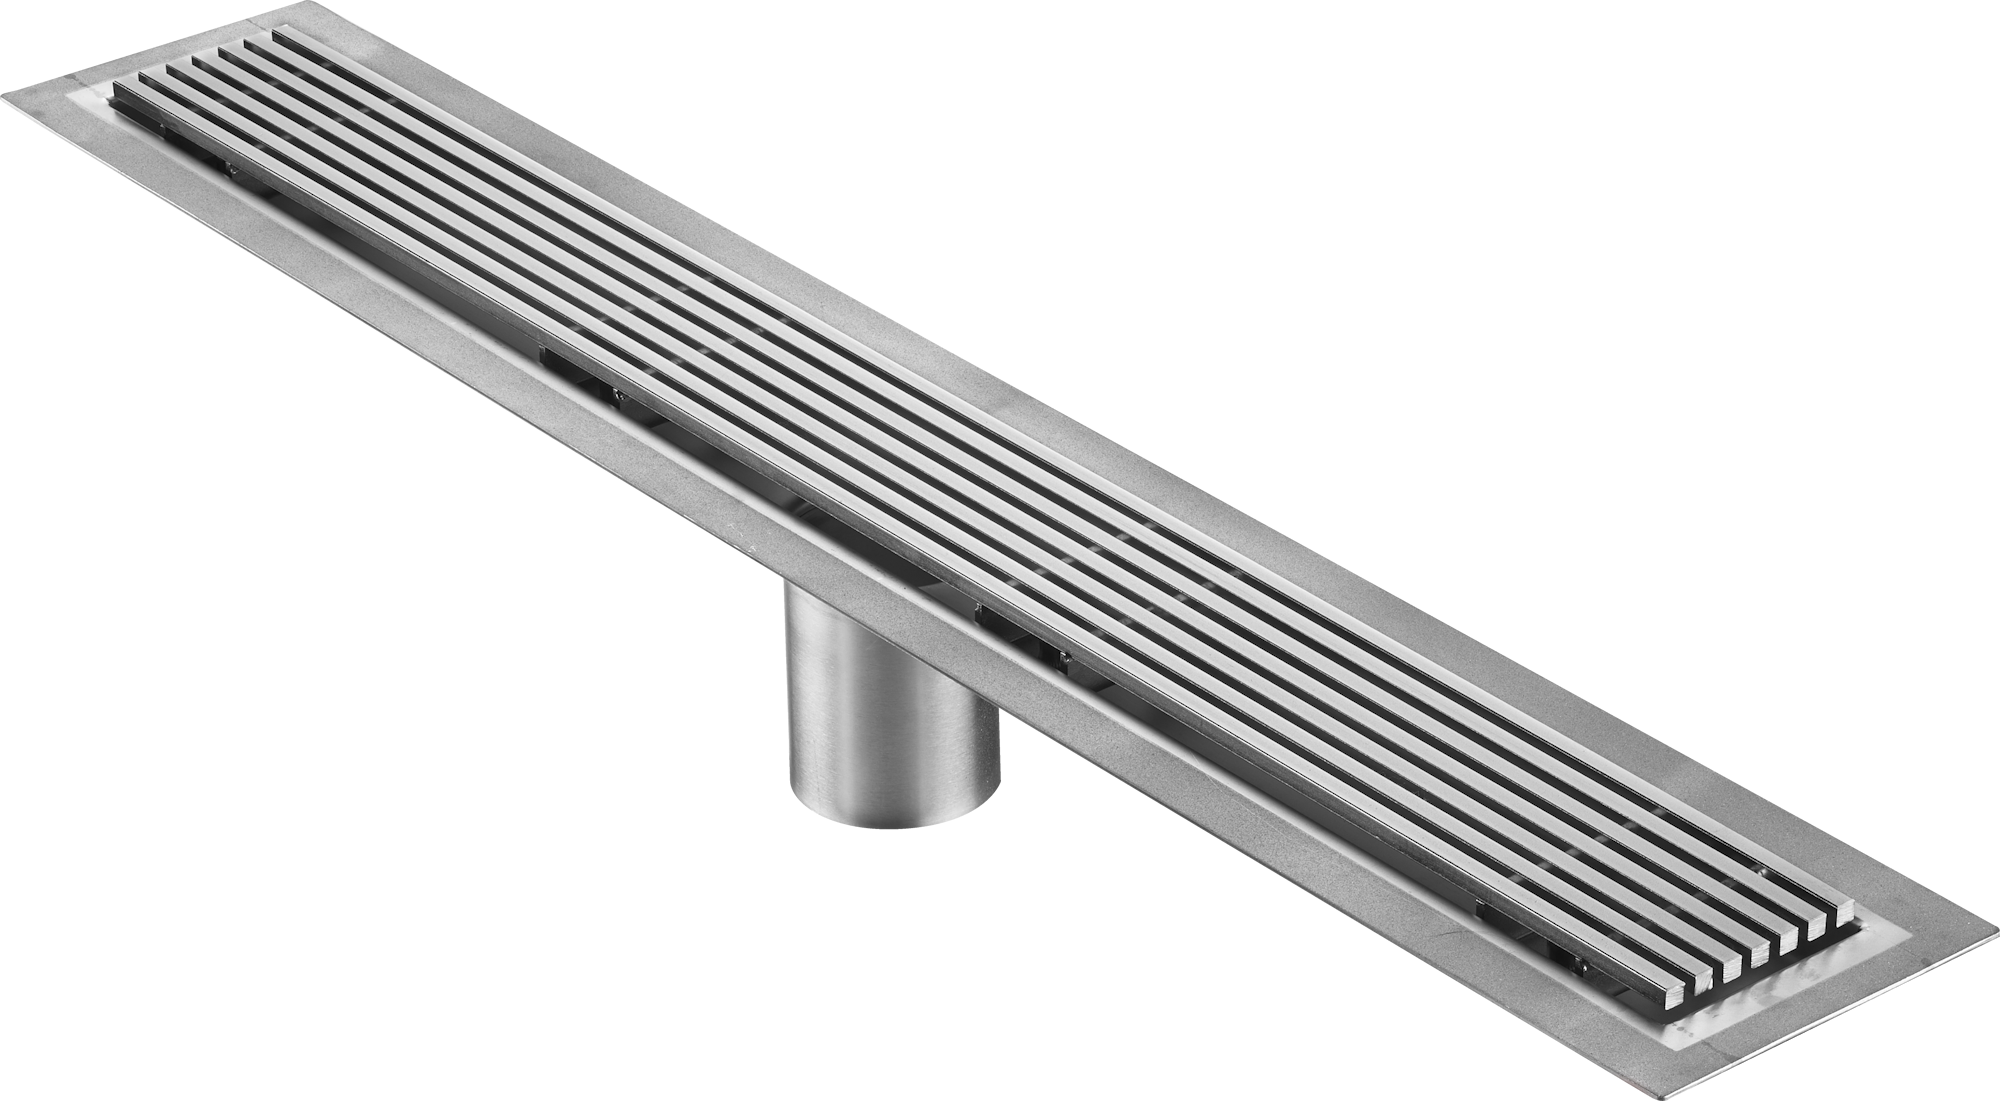 47 Inch Wedge Wire Grate Linear Drain Brushed Stainless Steel, Drains Unlimited